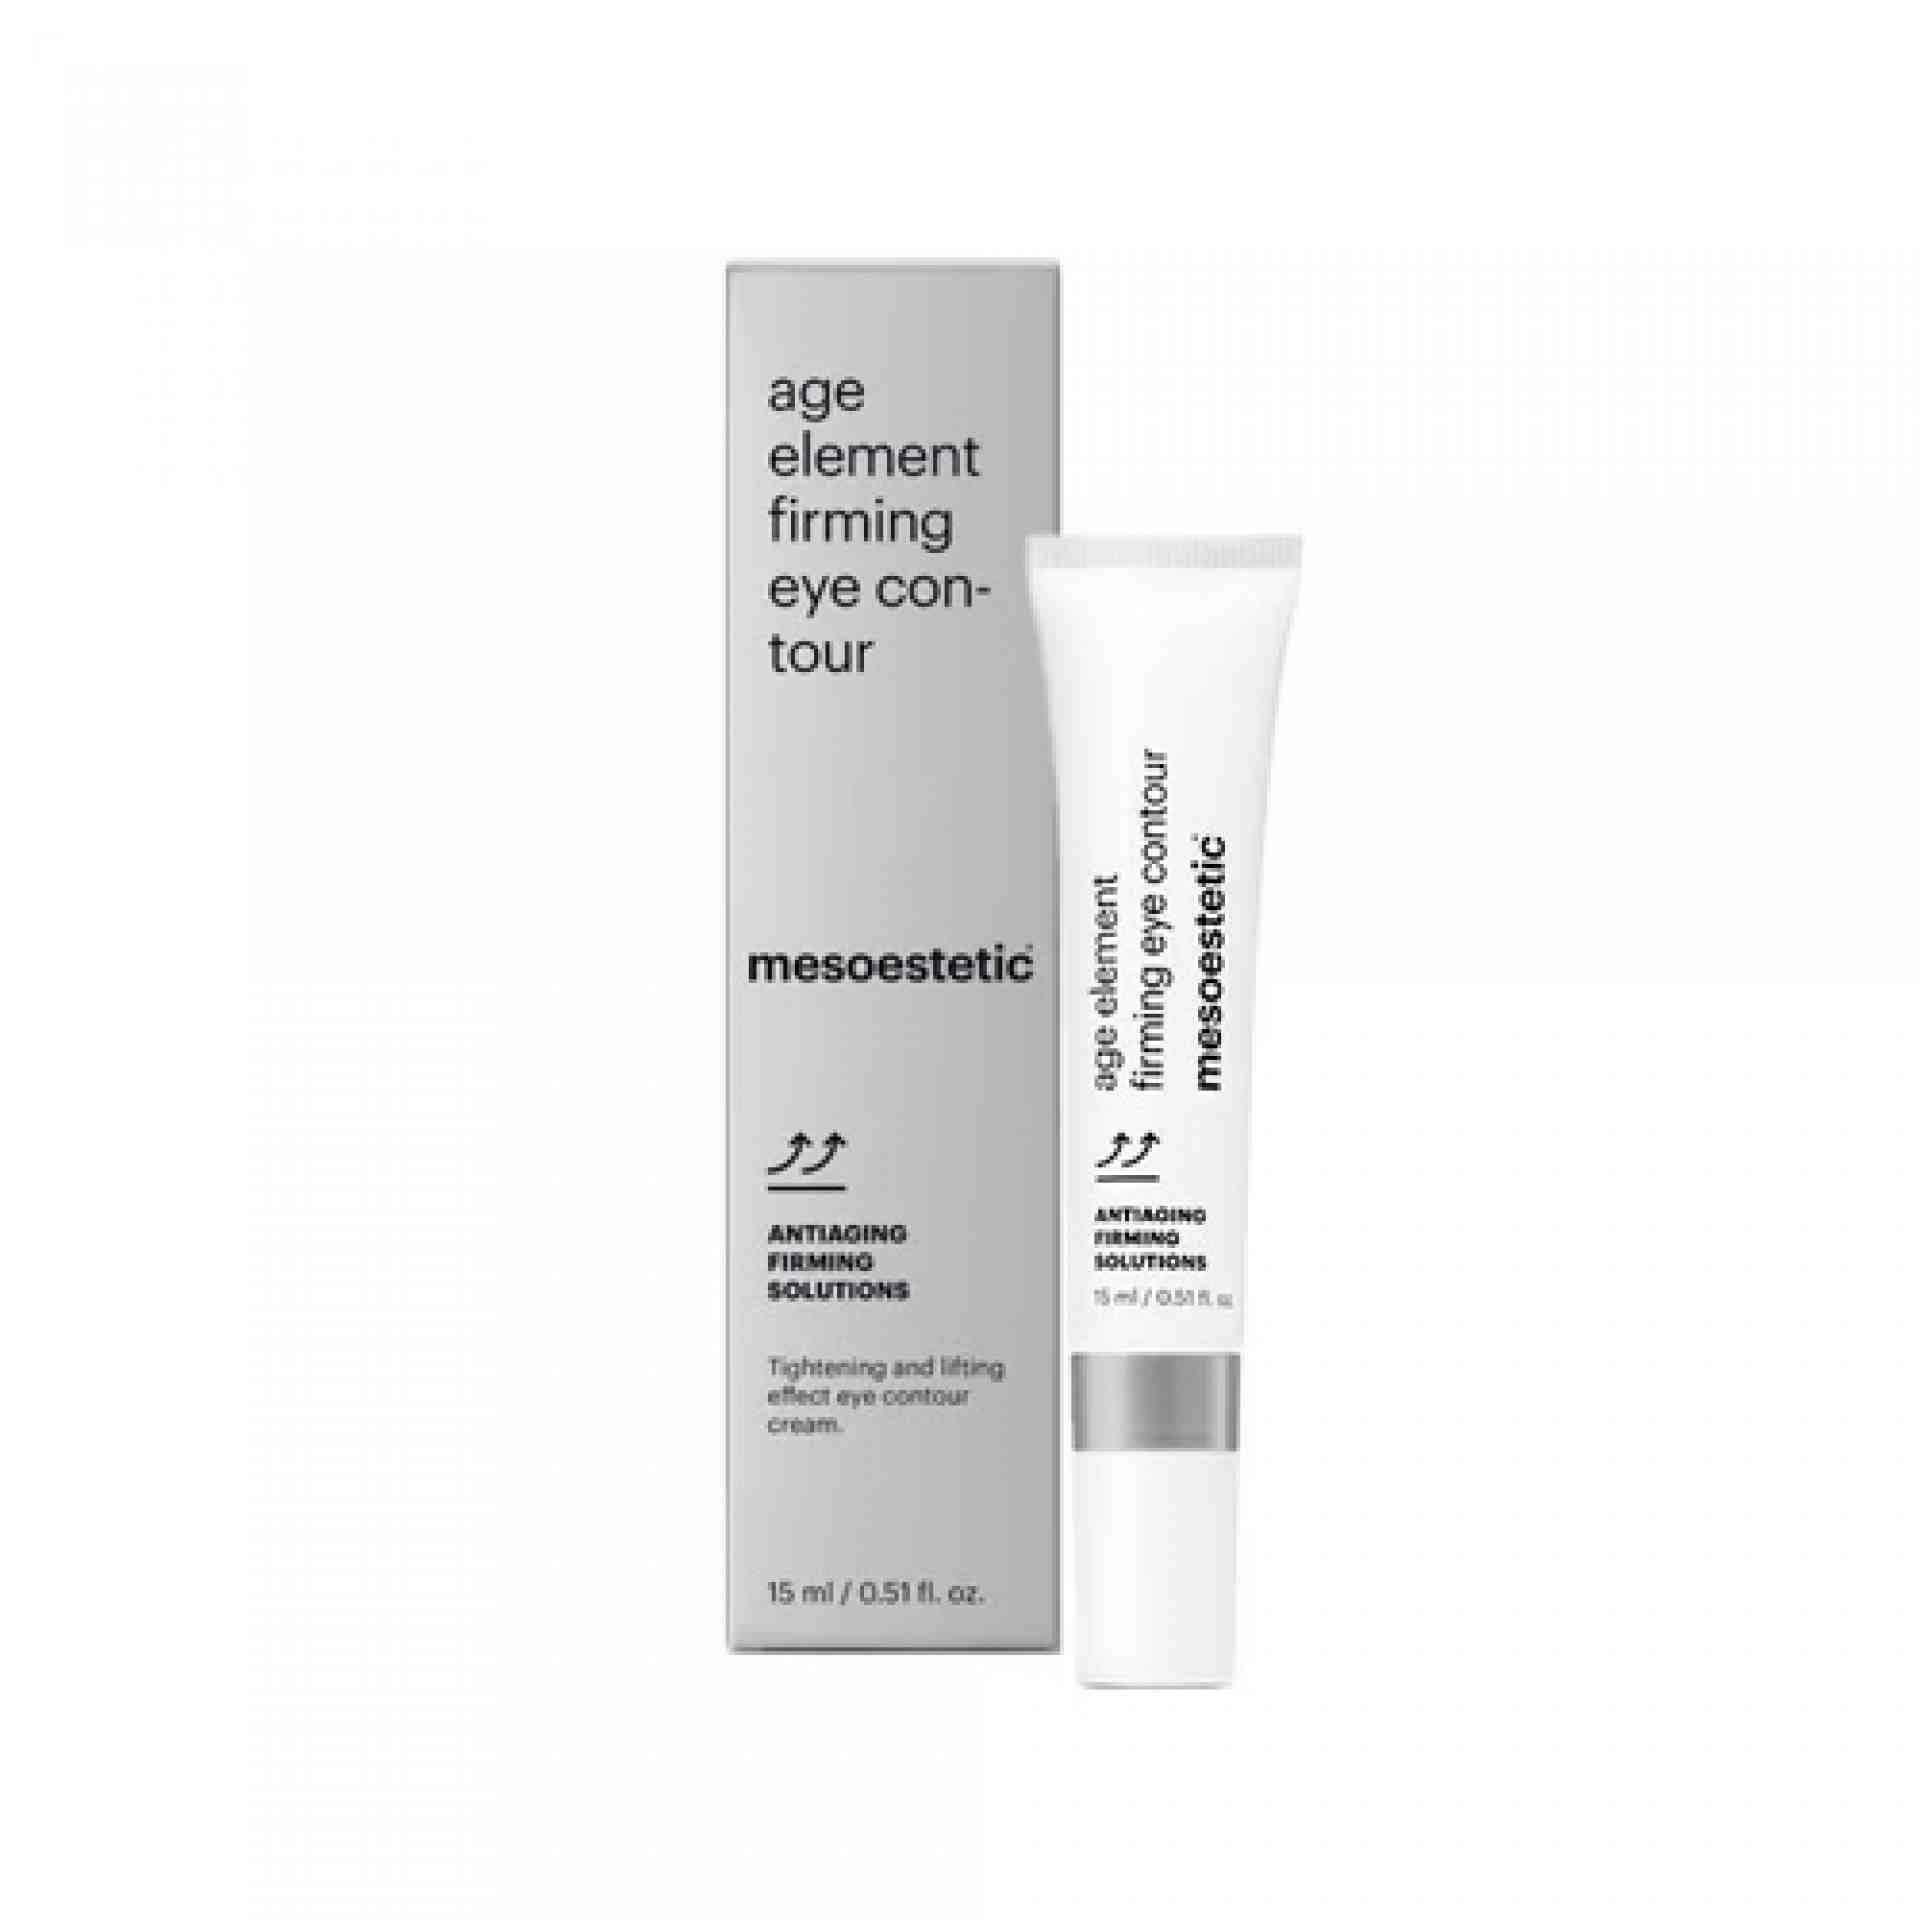 age element firming eye contour | contorno de ojos 15ml - antiaging firming solutions - mesoestetic ®